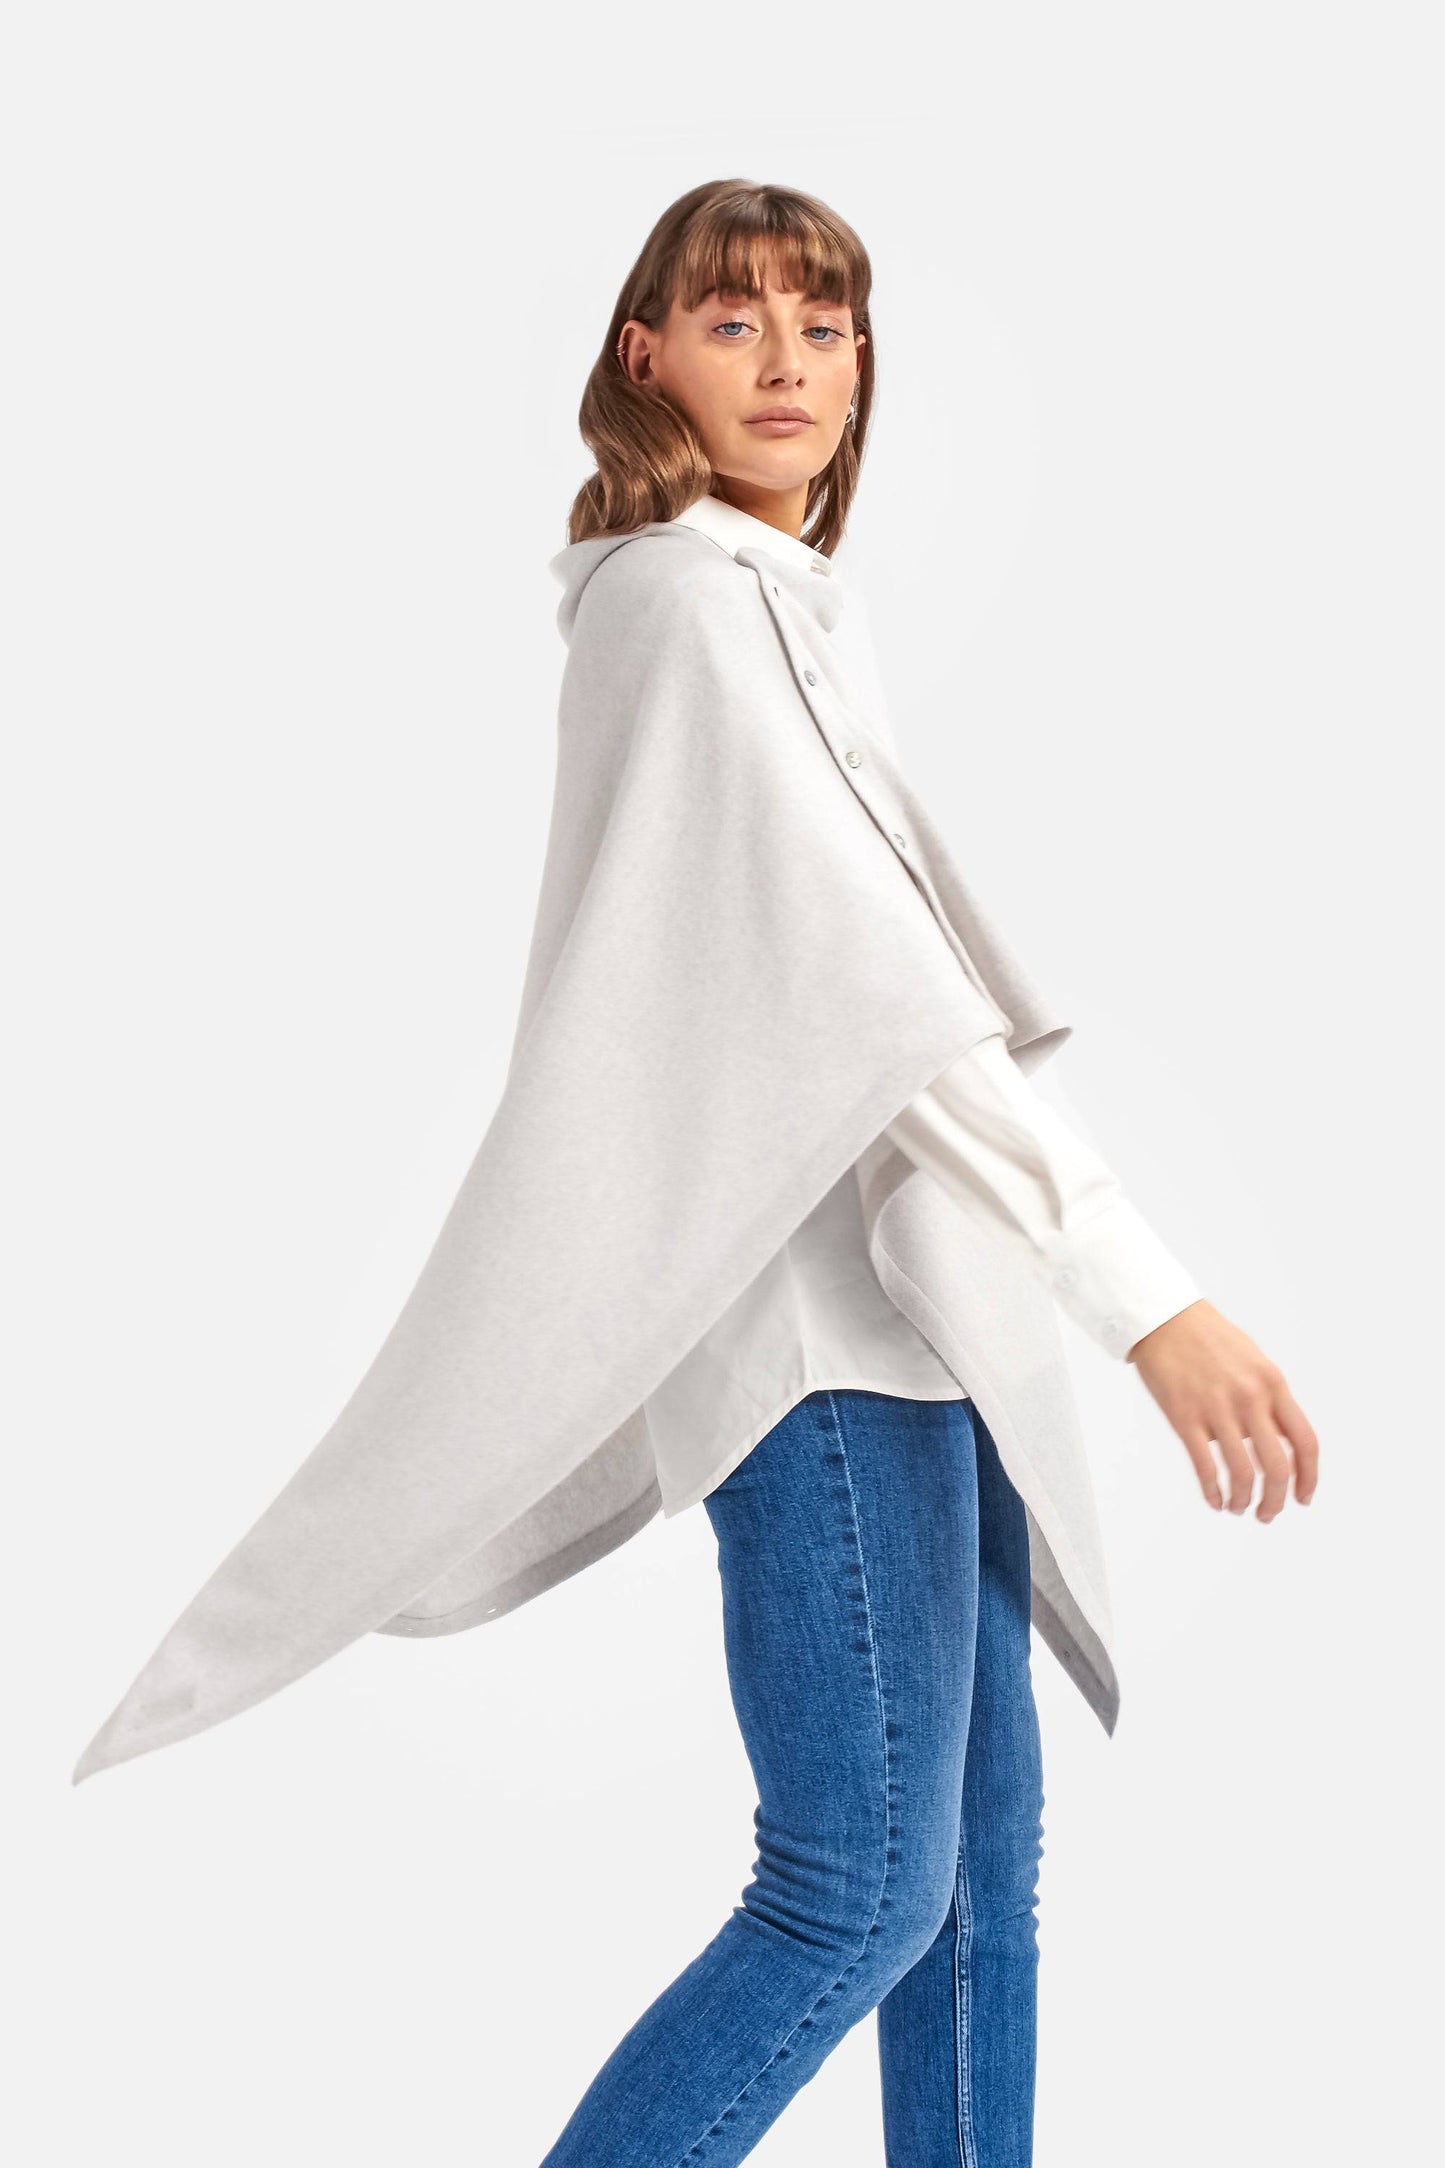 Cashmere & Merino Wool Long Length Button Poncho in Grey Marl by Woodcock & Cavendish for sale - Woodcock and Cavendish